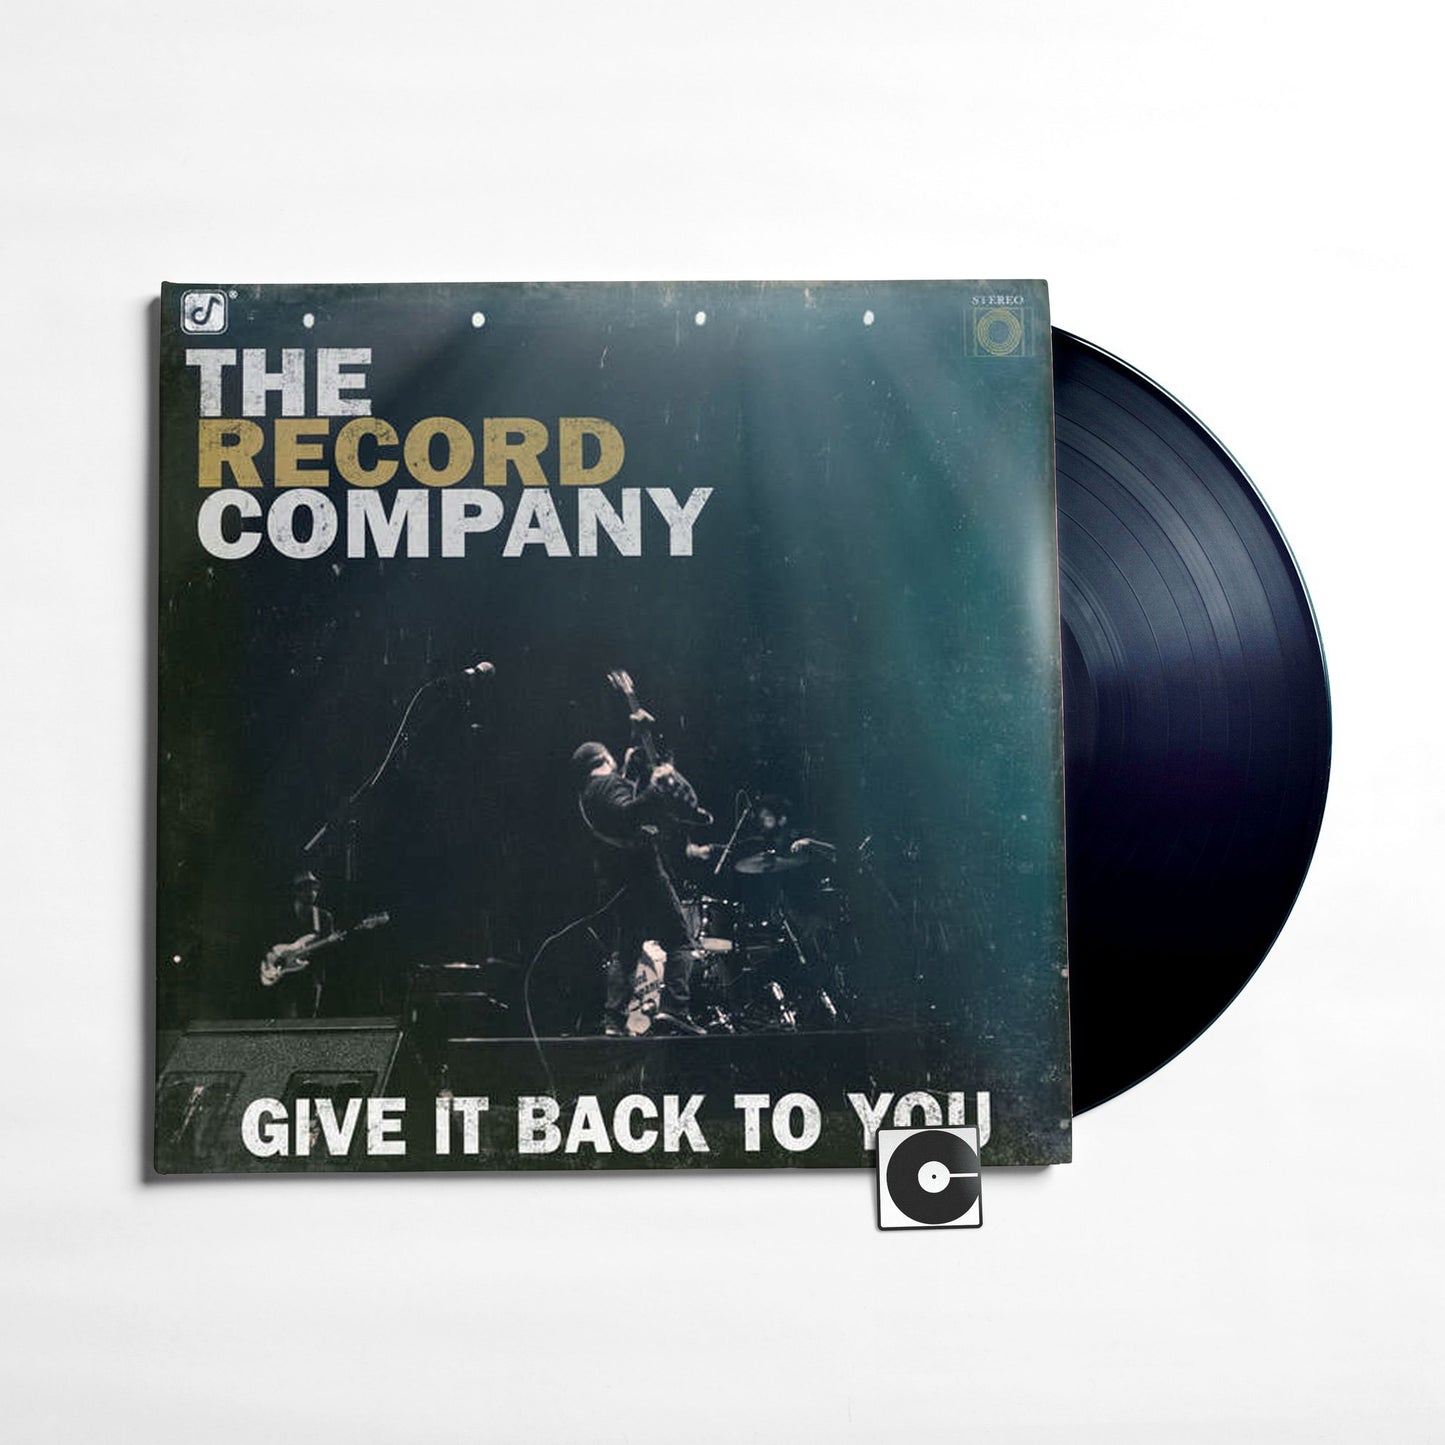 Record Company - "Give It Back To You"